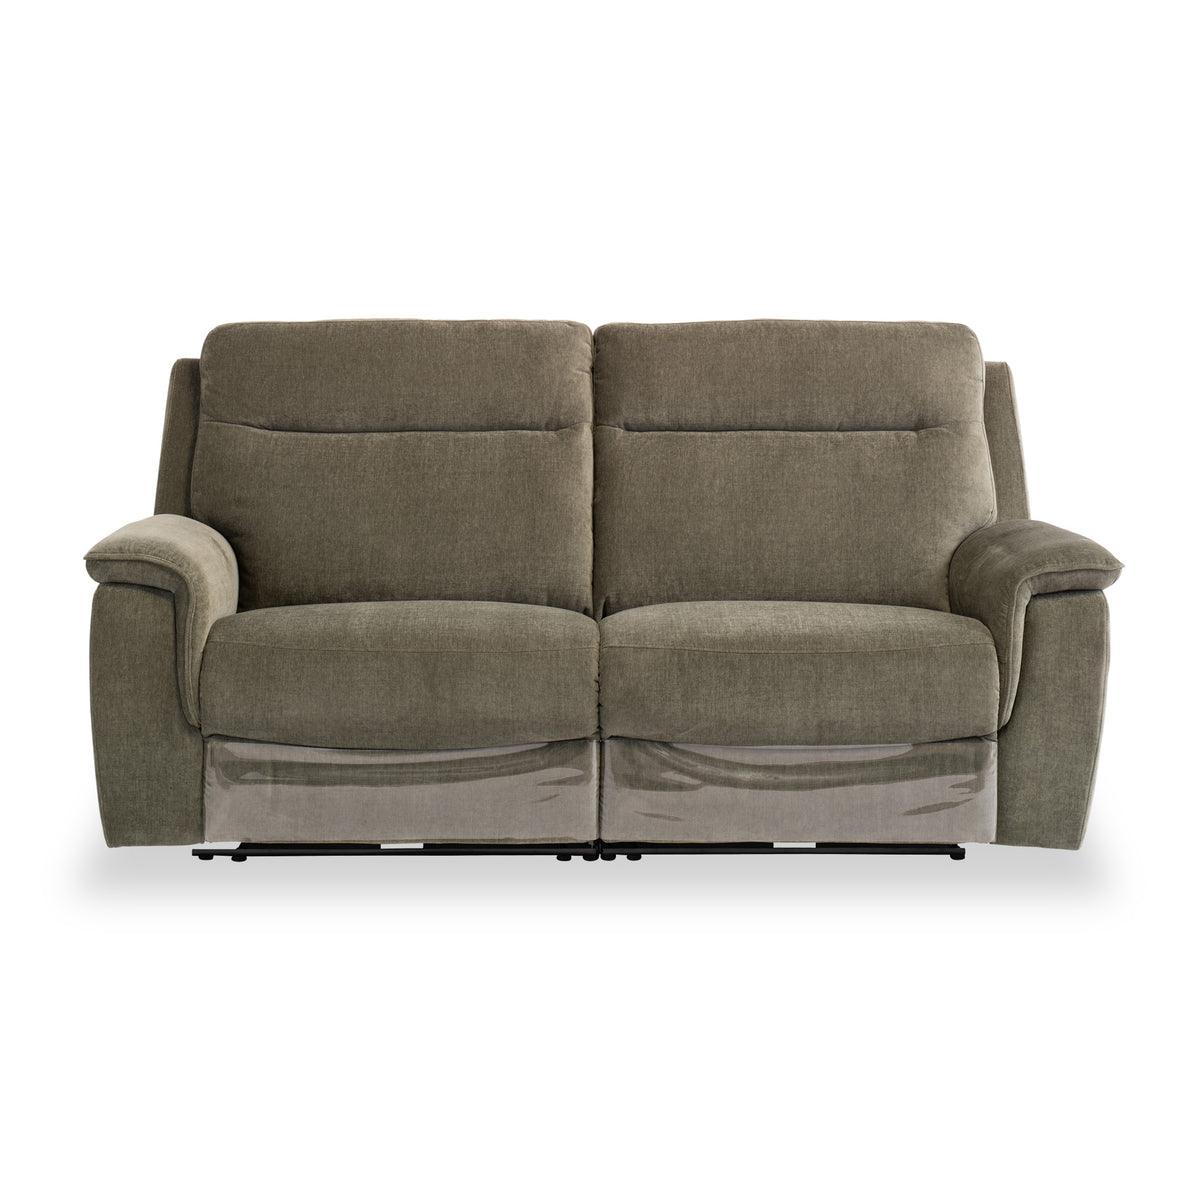 Weston Moss Green Fabric Electric Reclining 3 Seater Sofa from Roseland Furniture